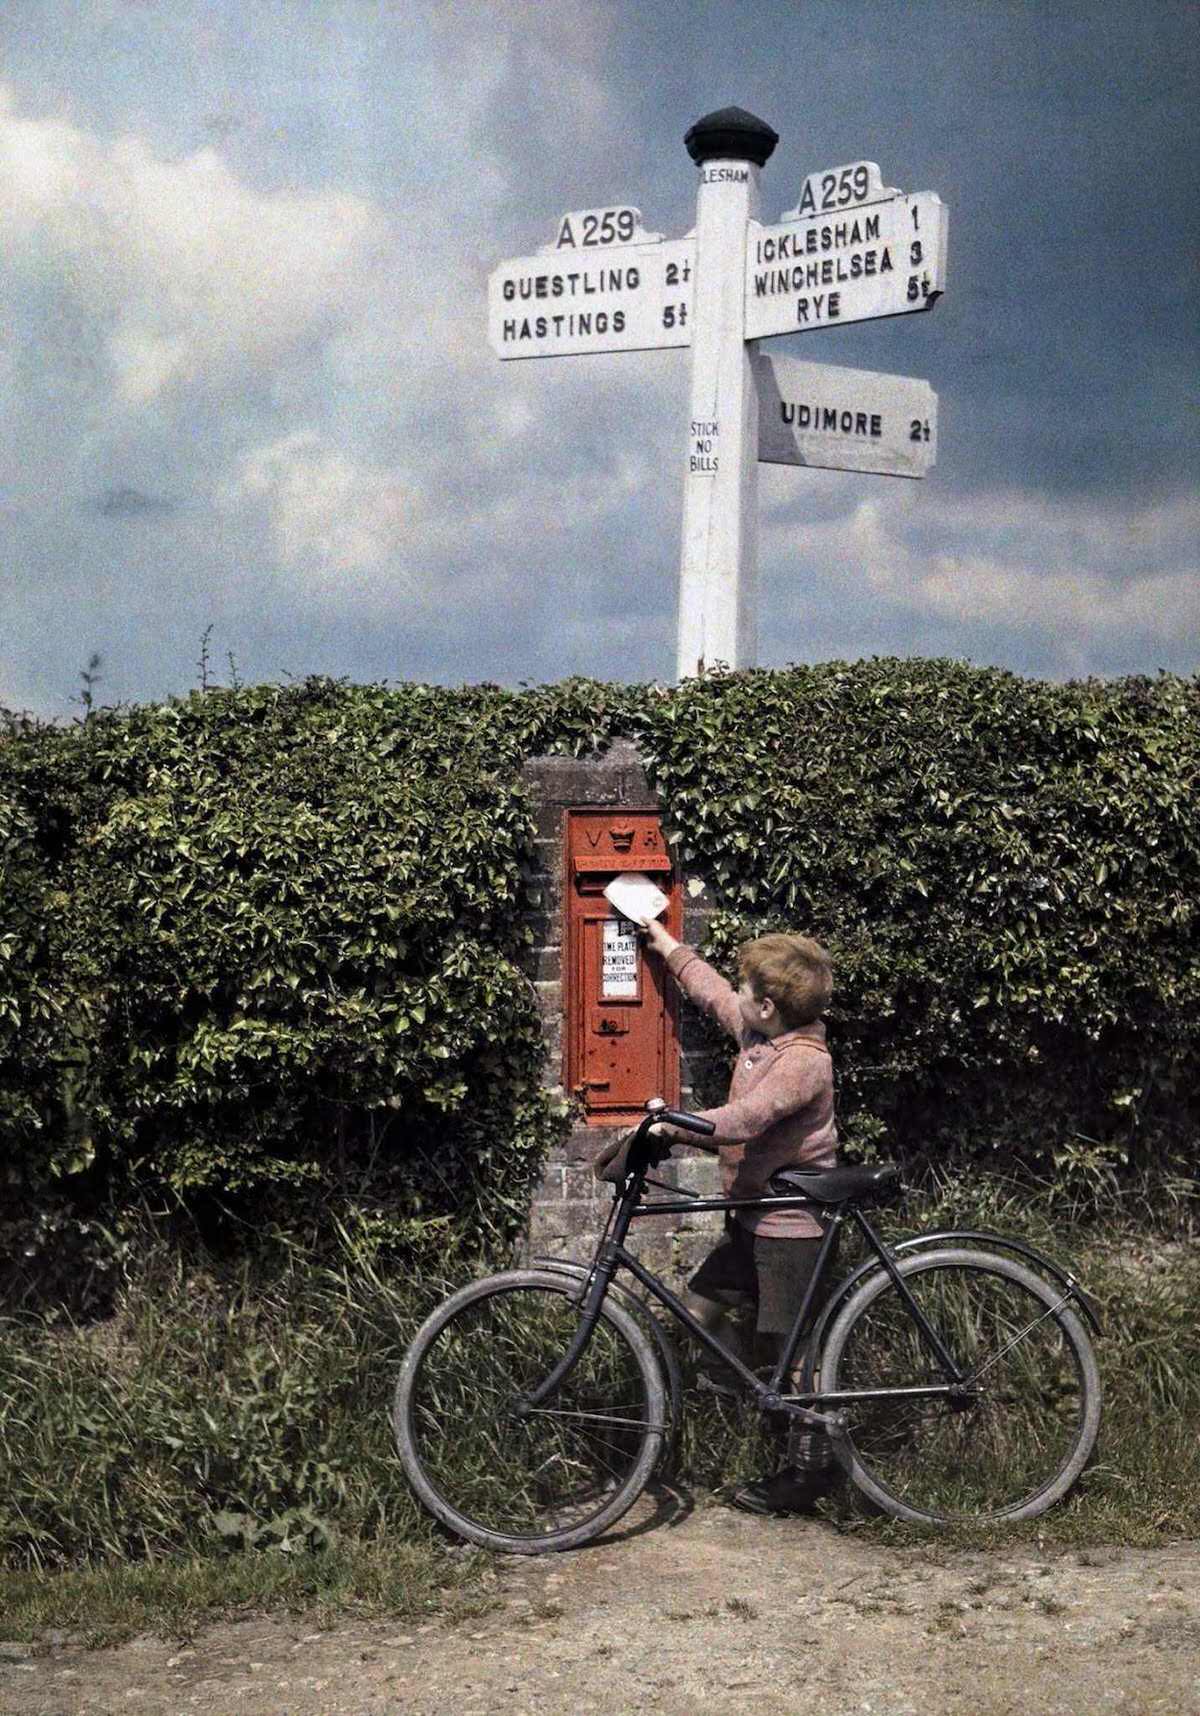 A little boy mails a letter in the hedgerow, in Sussex.